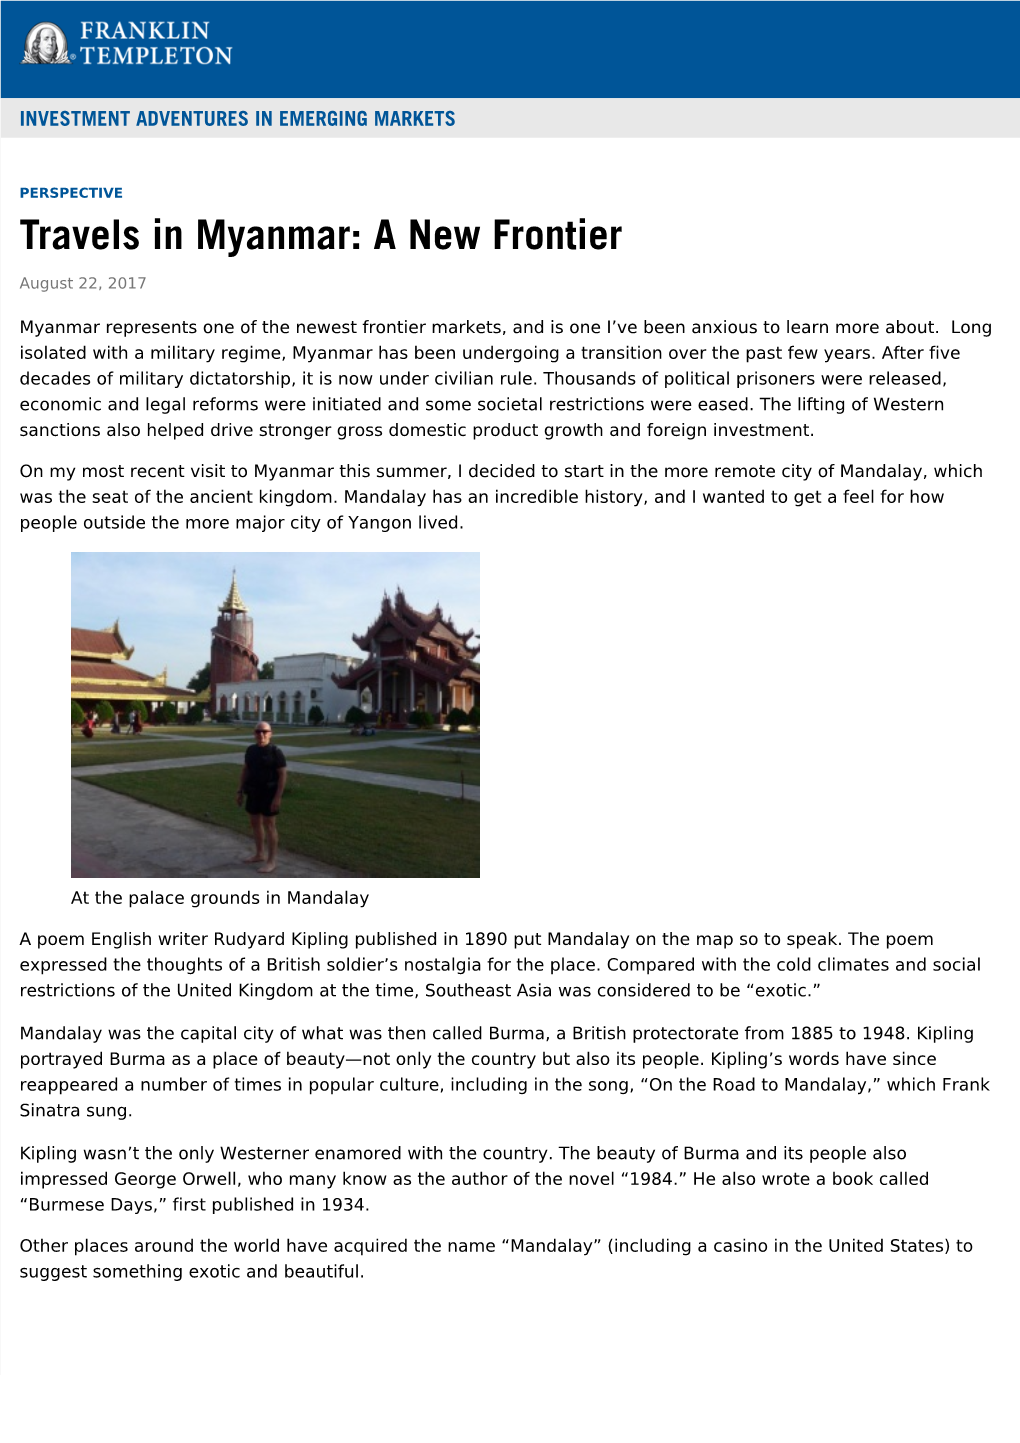 Myanmar Represents One of the Newest Frontier Markets, and Is One I’Ve Been Anxious to Learn More About